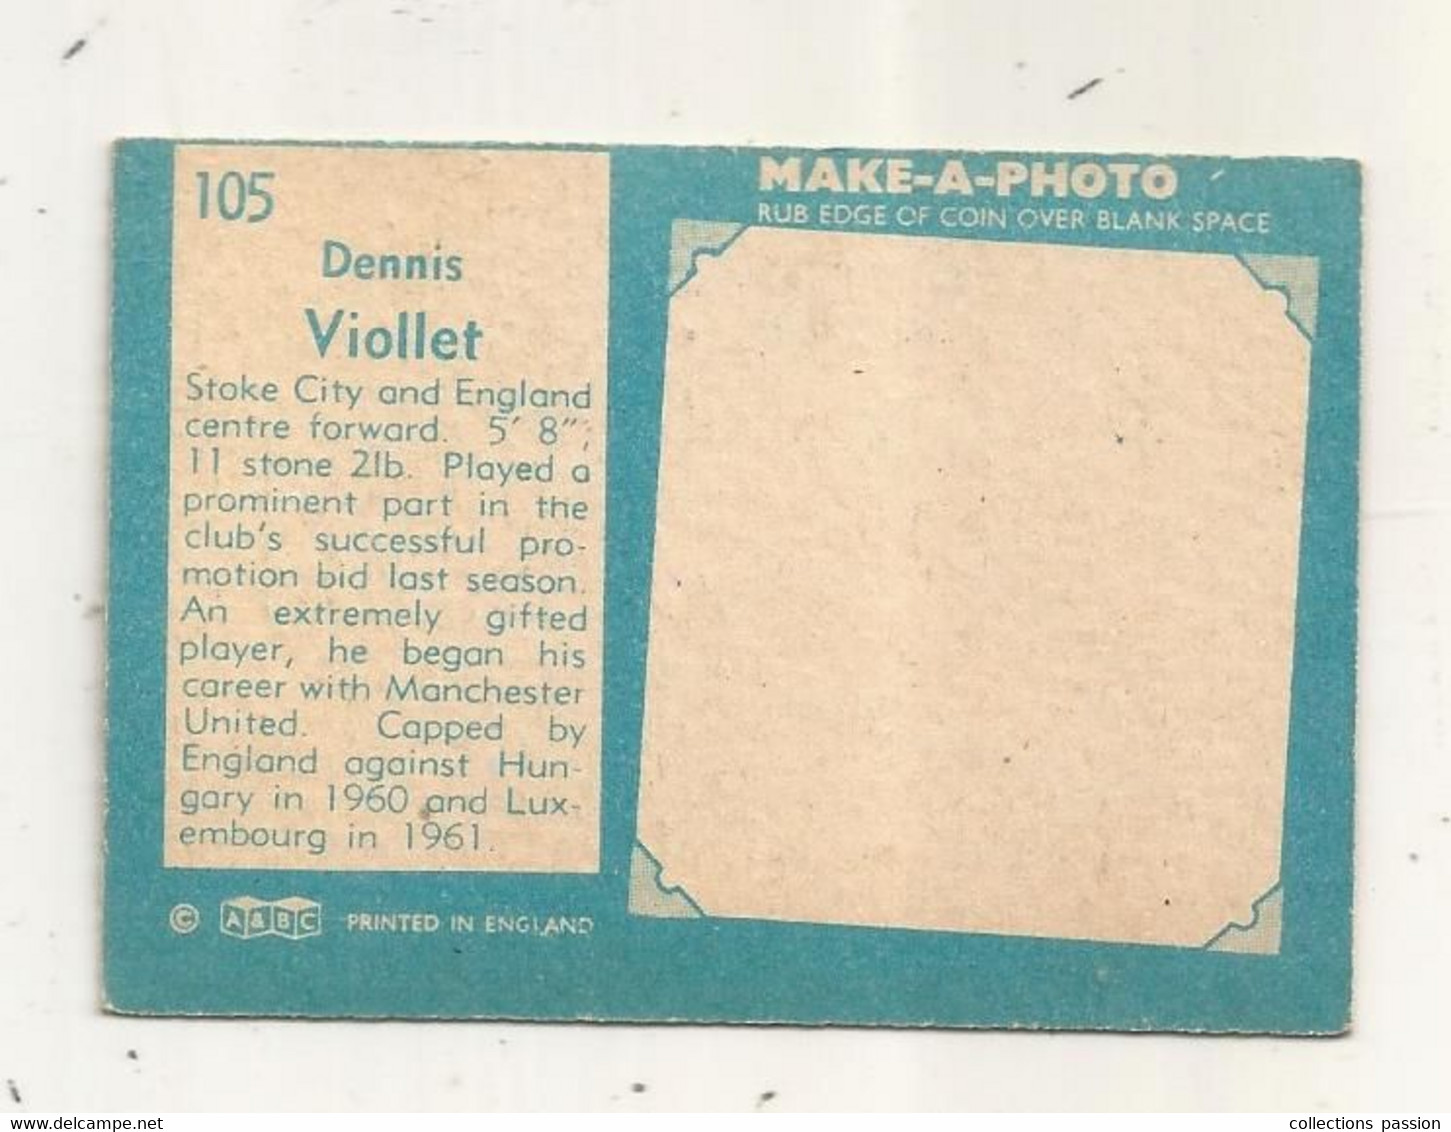 Trading Card , A&BC , England, Chewing Gum, Serie: Make A Photo , Année 60 , N° 105, DENNIS VIOLLET, Stoke City - Trading Cards